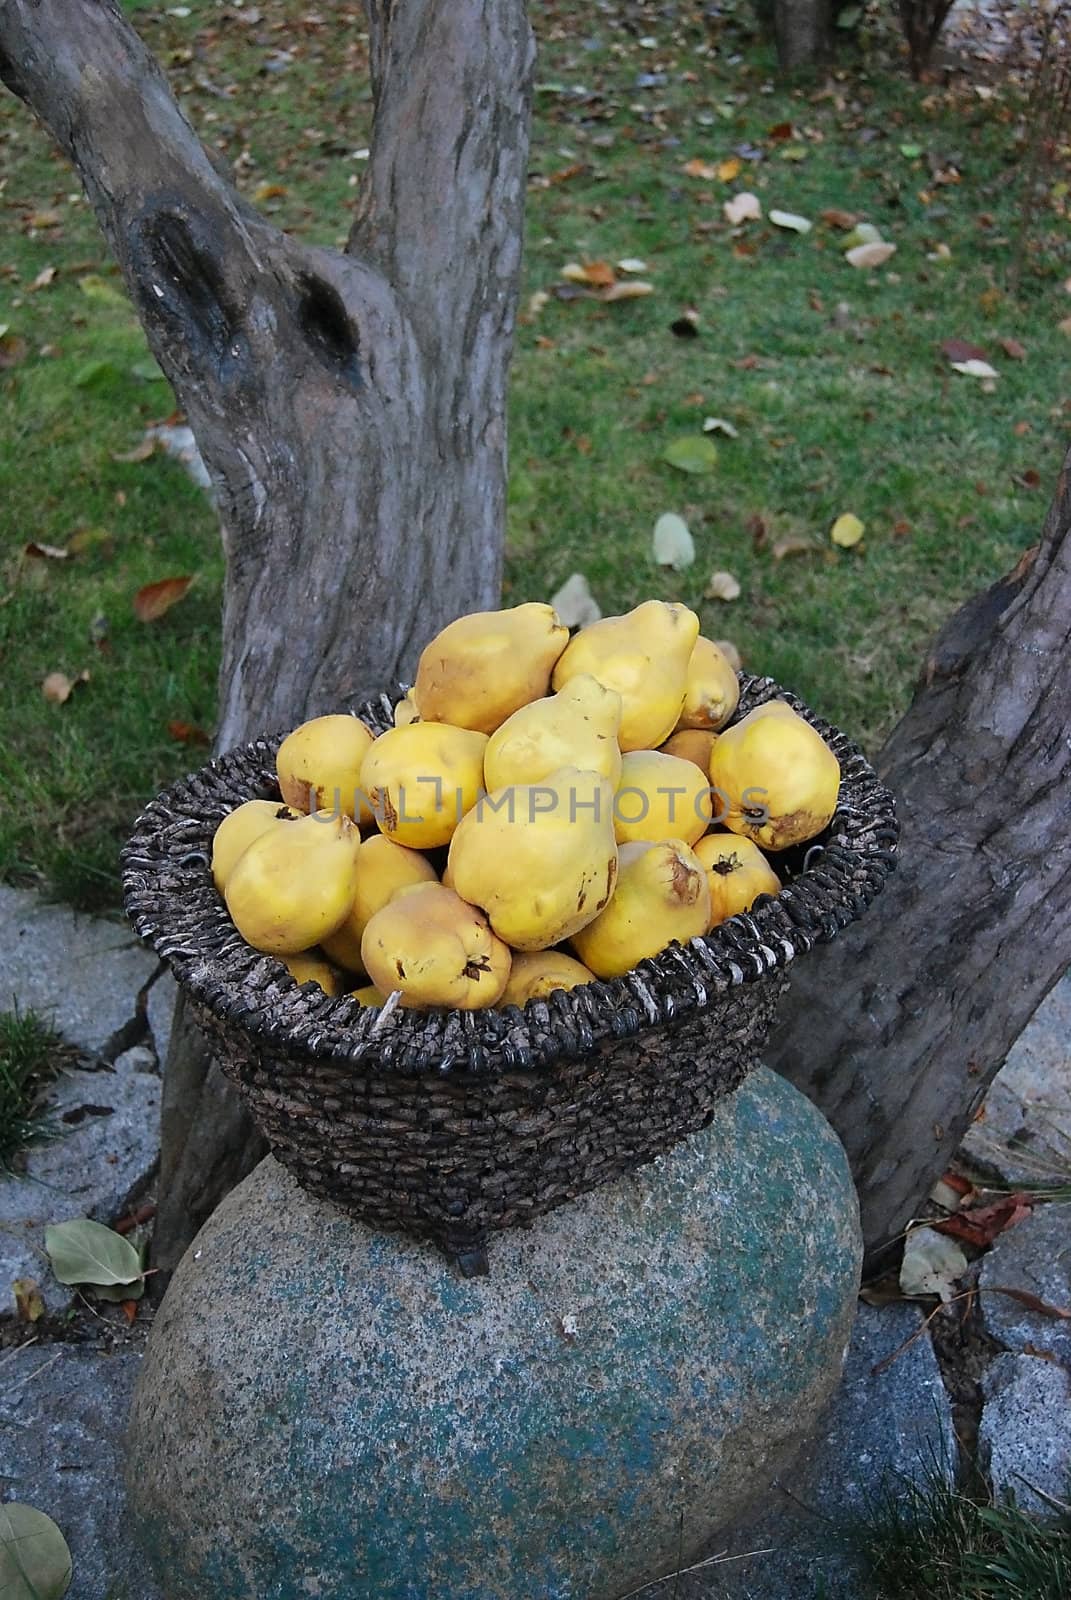 Wicker-basket, yellow quinces, rounded stone, tree in autumn